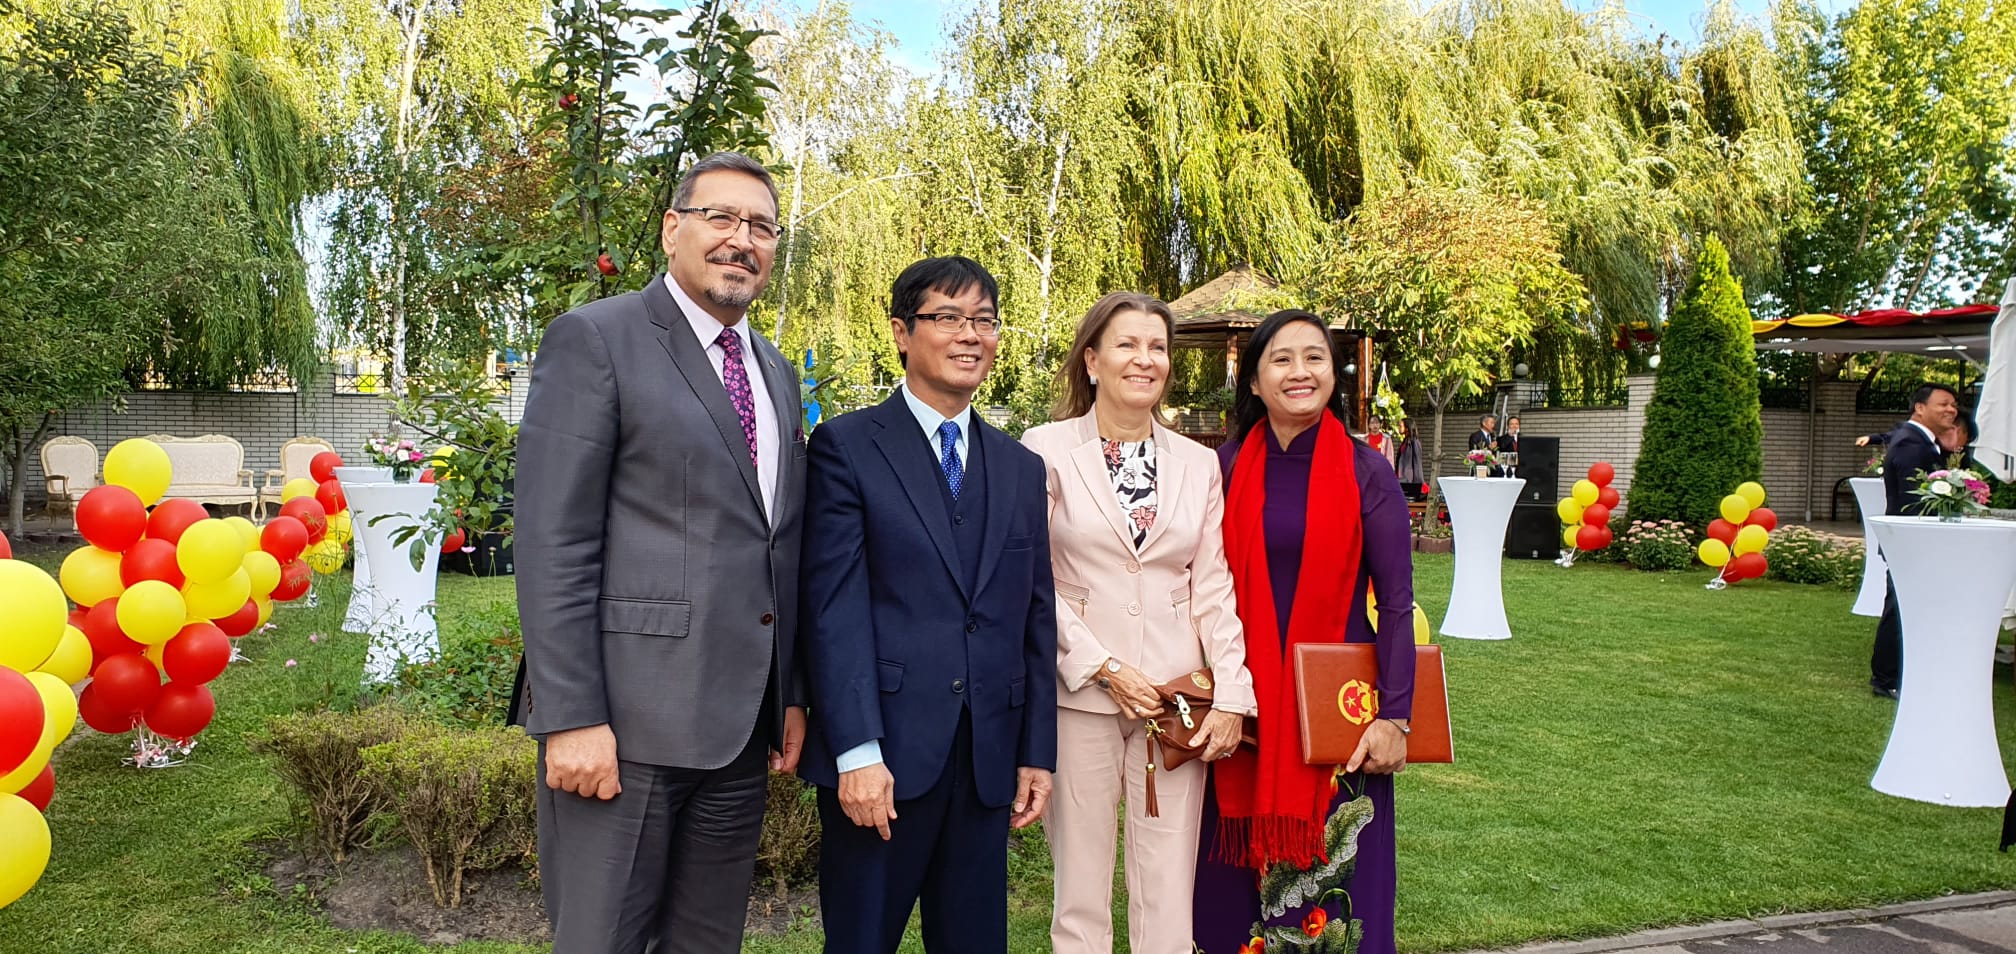 Ambassador Dajani with his spouse and Ambassador of Vietnam in Ukraine Mr. Nguyen Hong Thach with his spouse